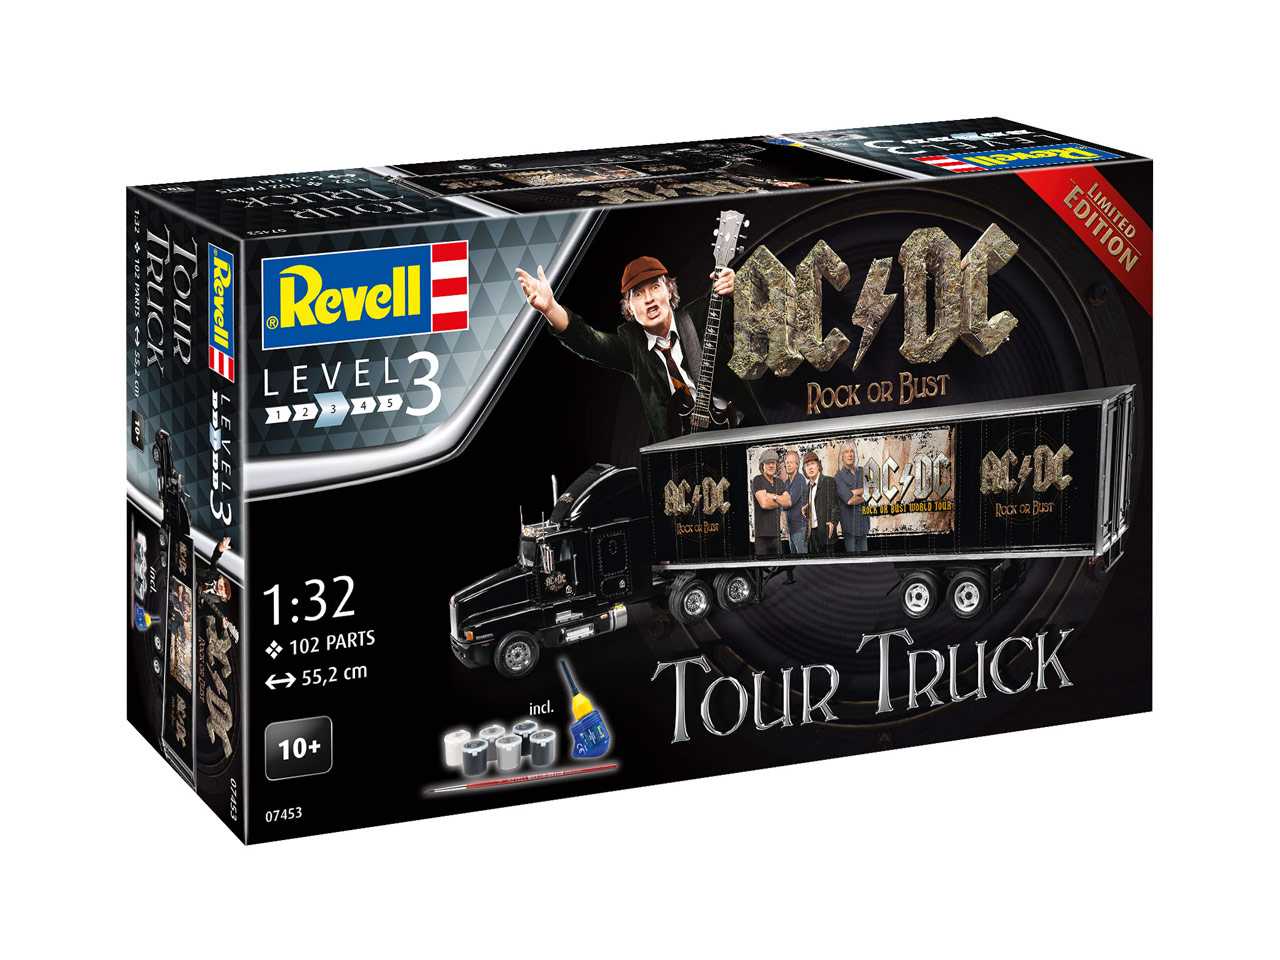 Gift-Set truck Limited Edition 07453 - Truck & Trailer 